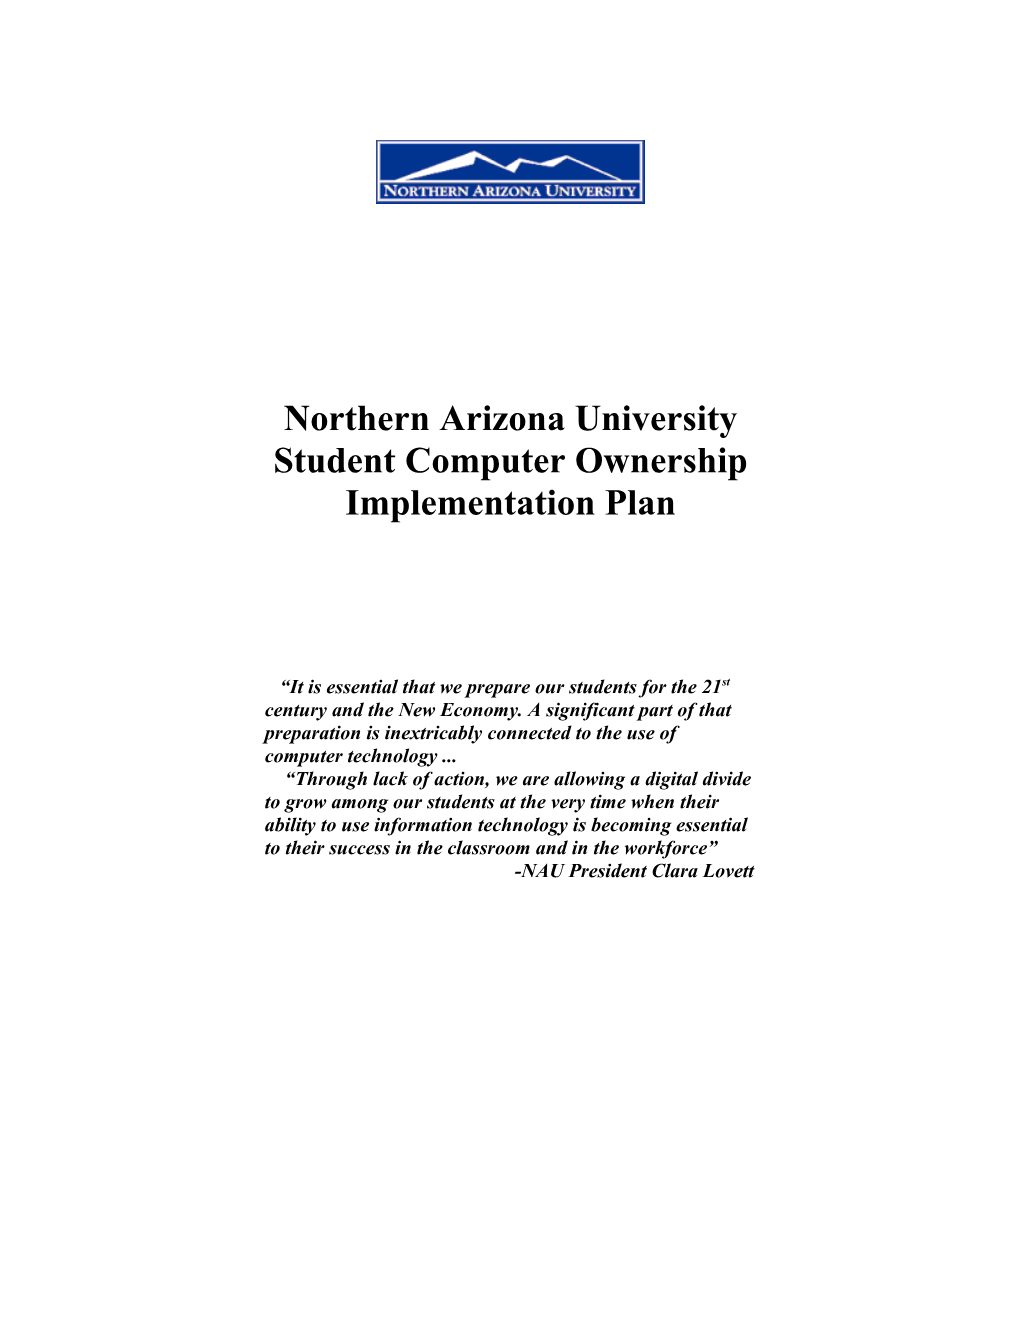 Student Computer Ownership Implementation Plan